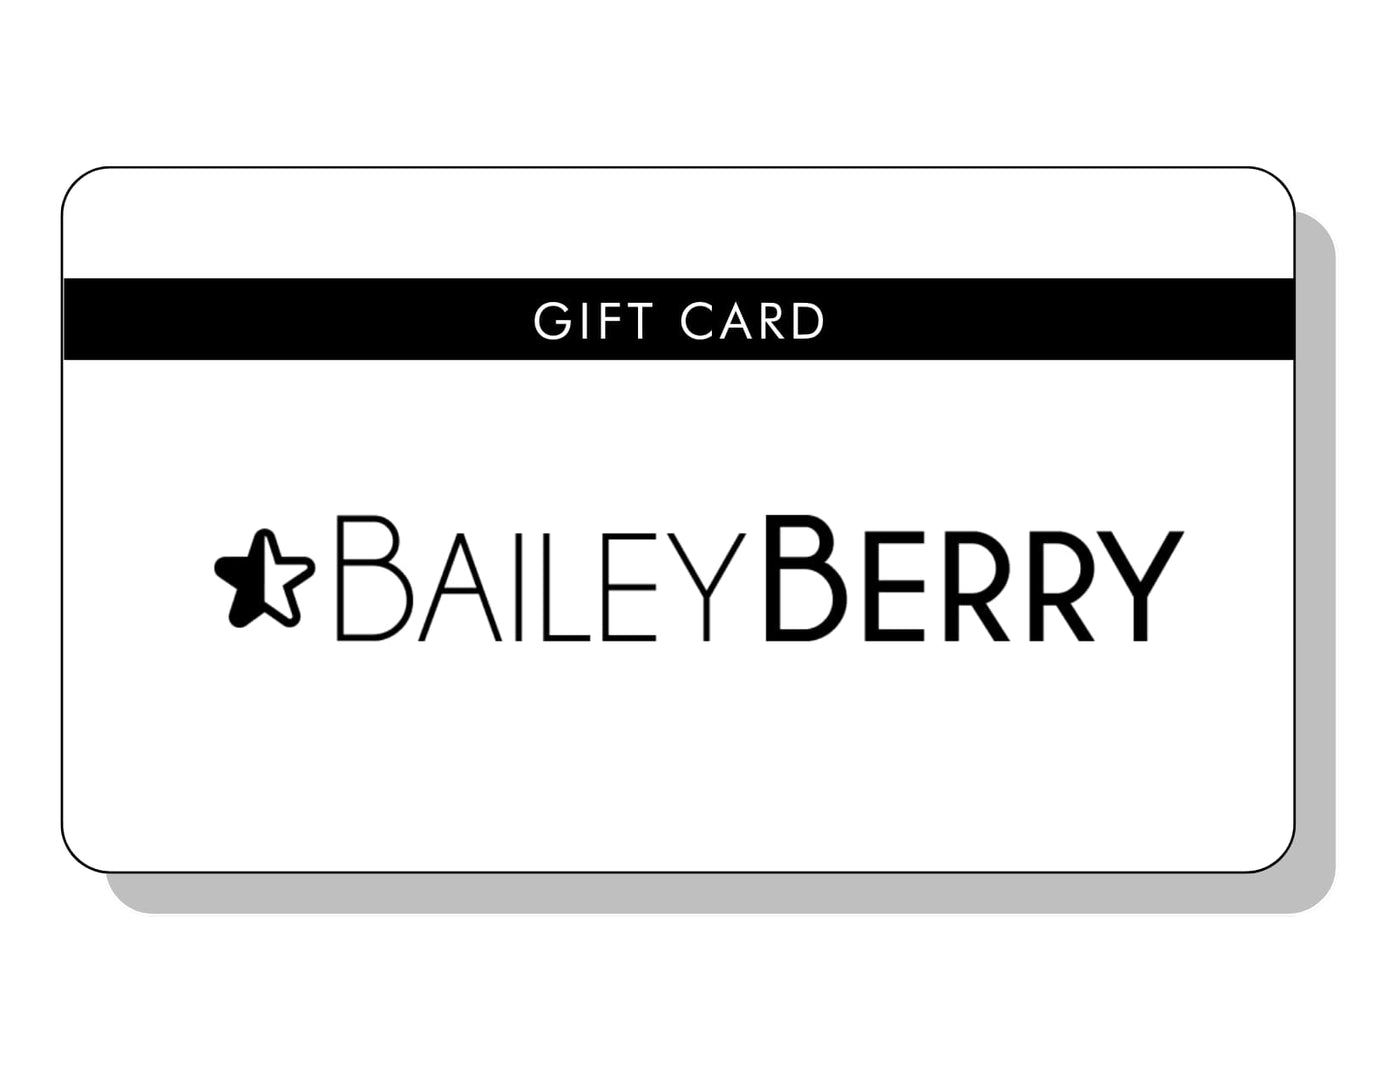 BAILEY BERRY Gift Card